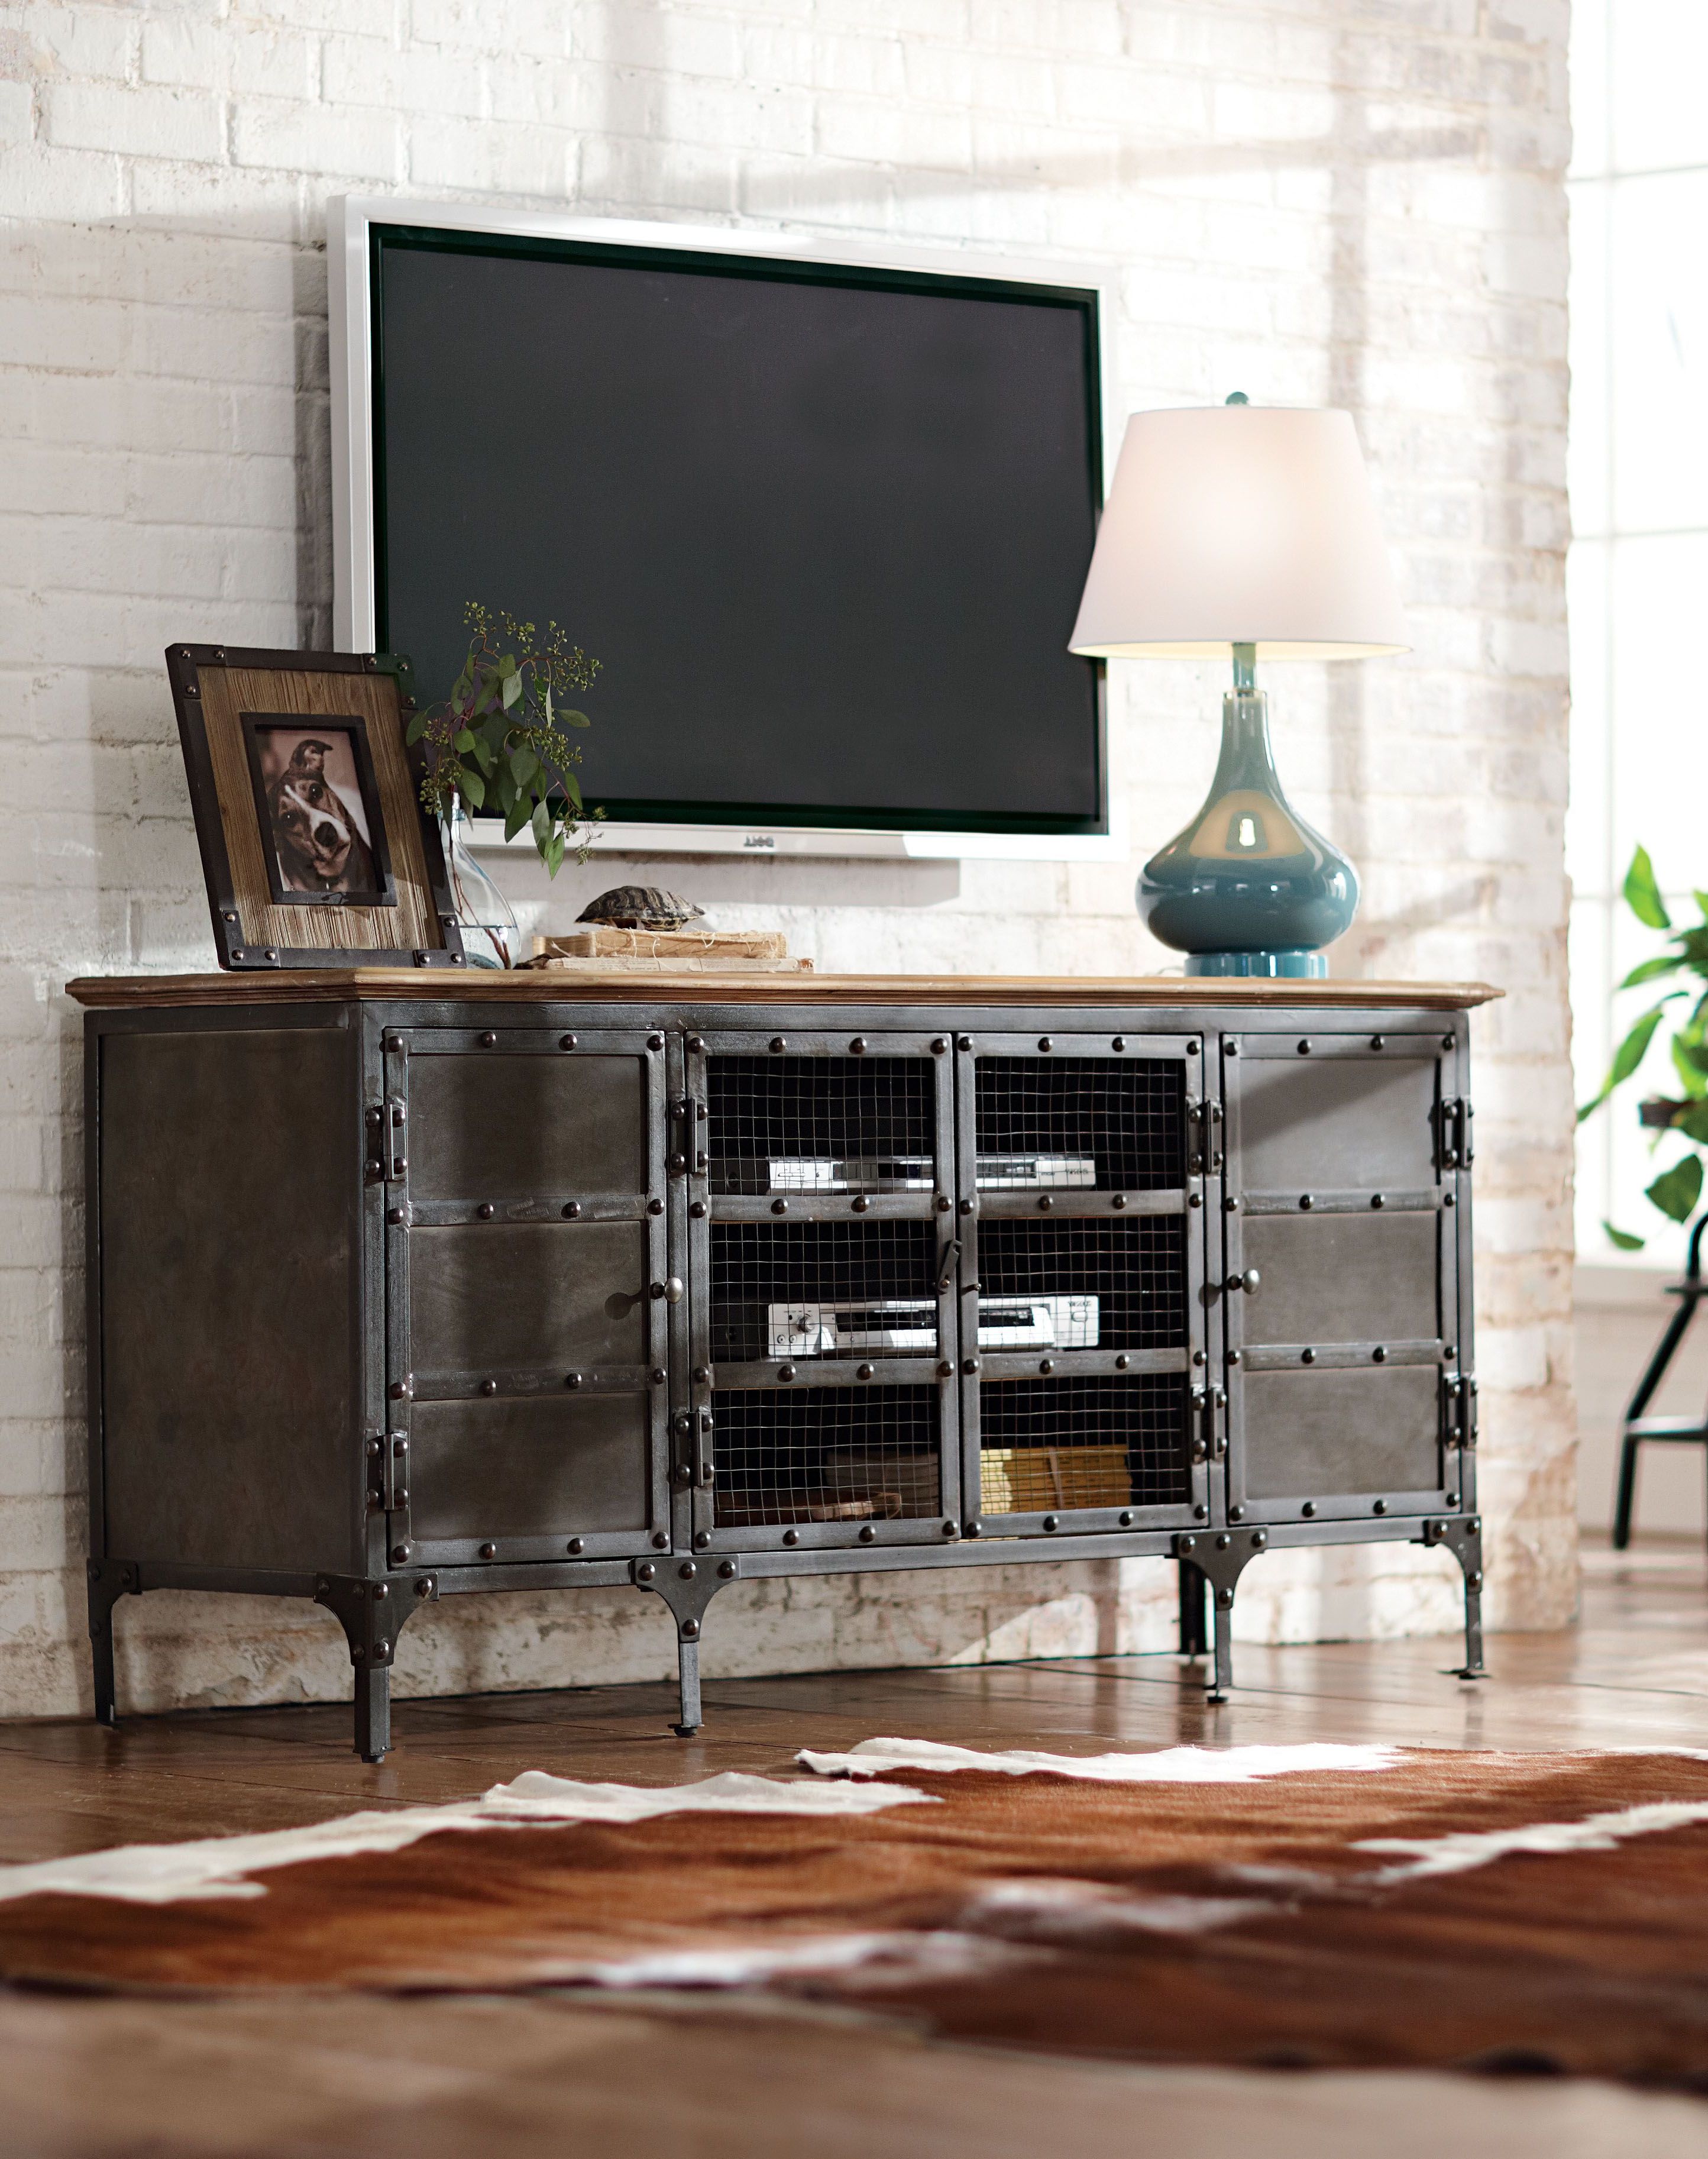 Tv Stand Made Stylish. It's The Perfect Complement To An Industrial Inside Most Recent Industrial Style Tv Stands (Photo 7 of 20)